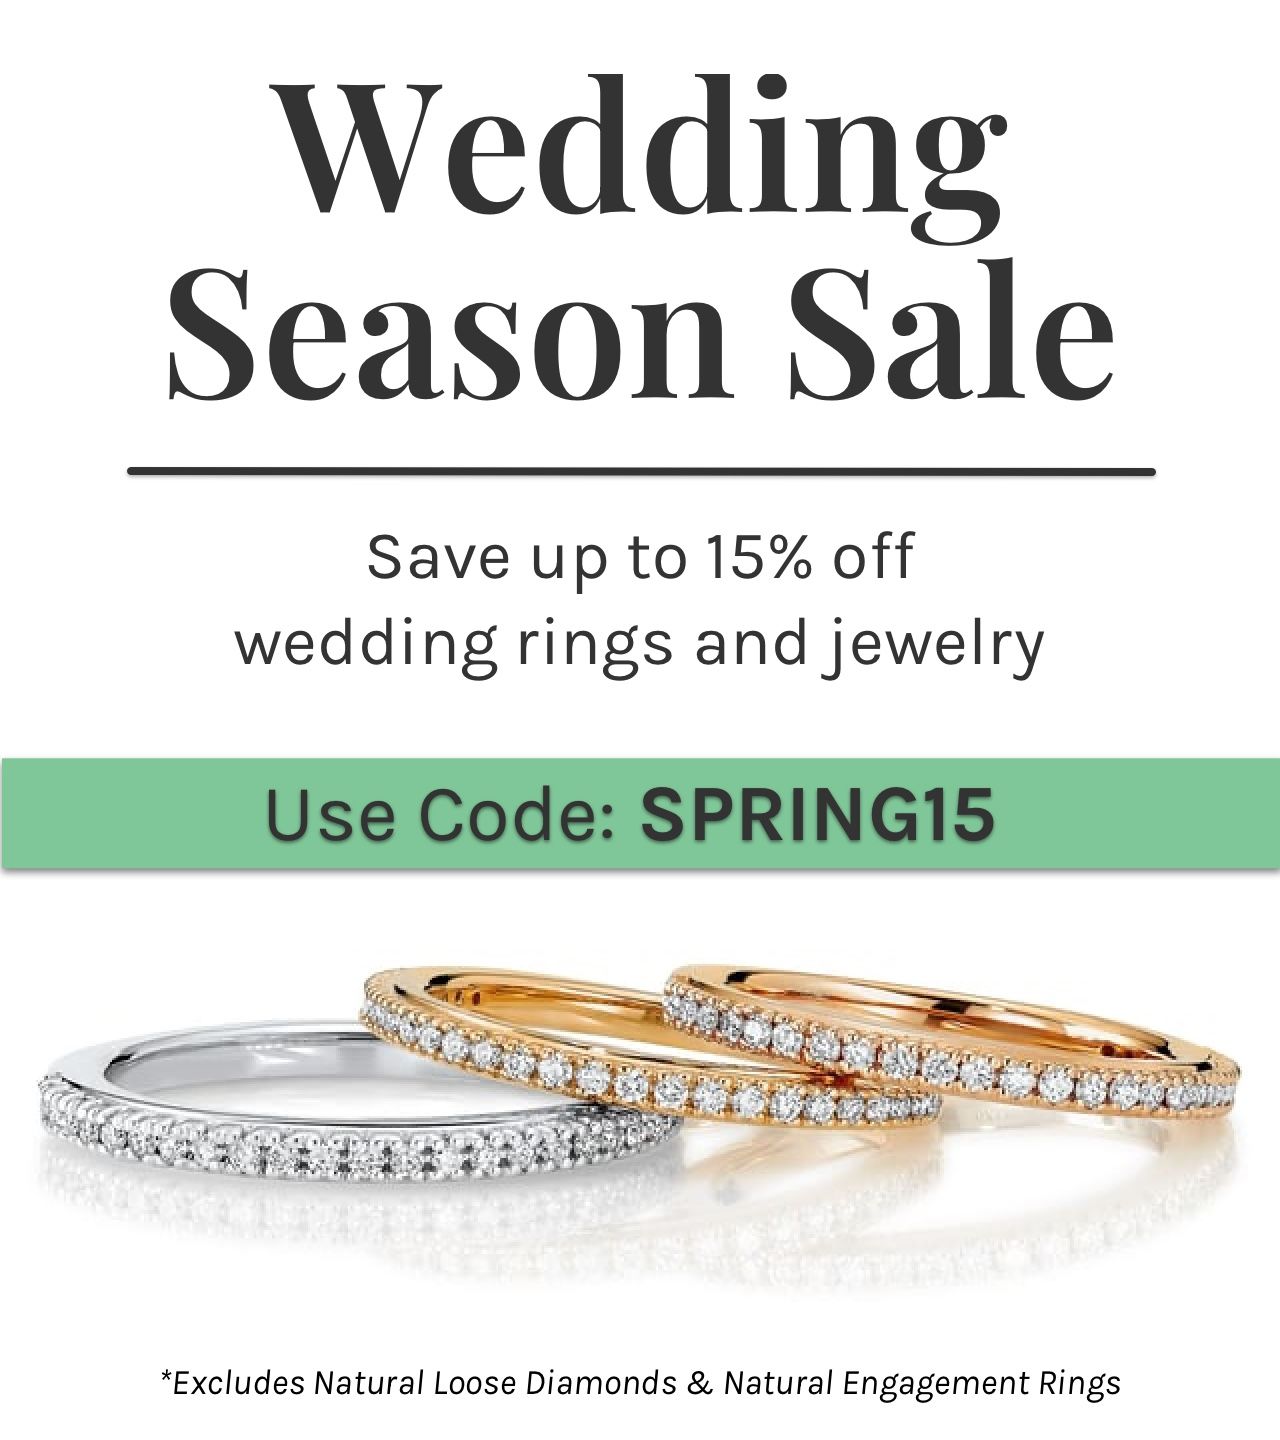 Save up to 15% off, wedding rings and jewelry.